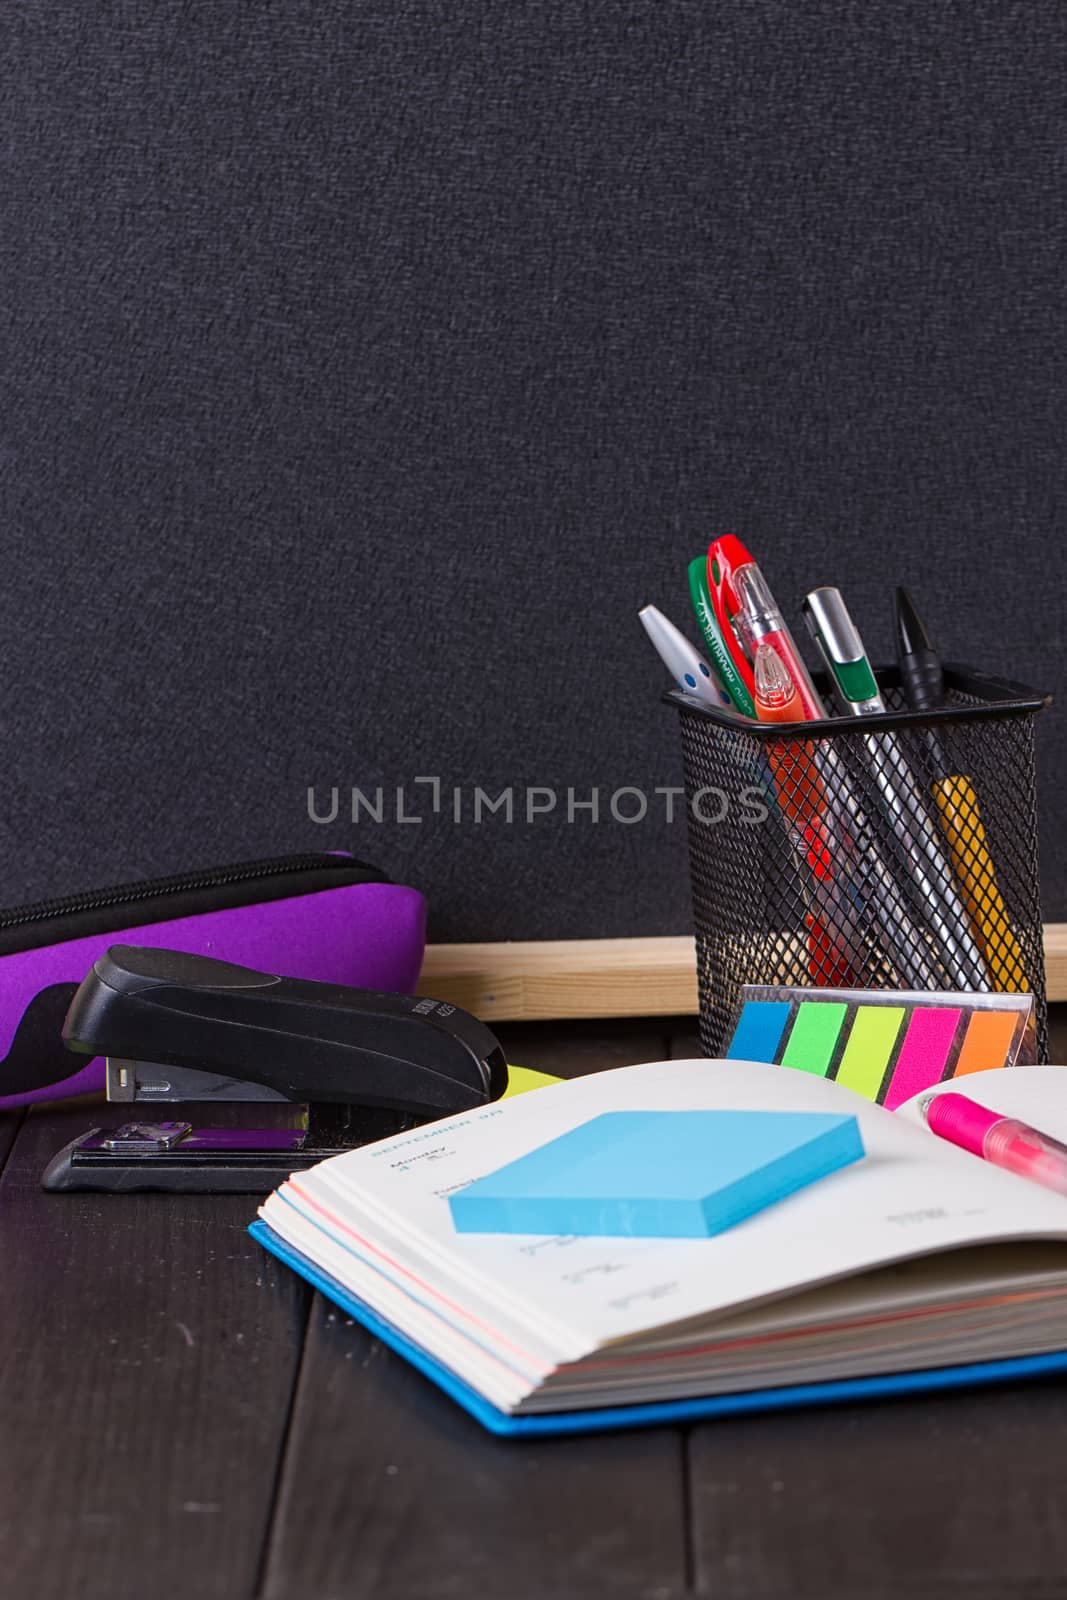 Stationery: pens, pen holder, diary on a black background